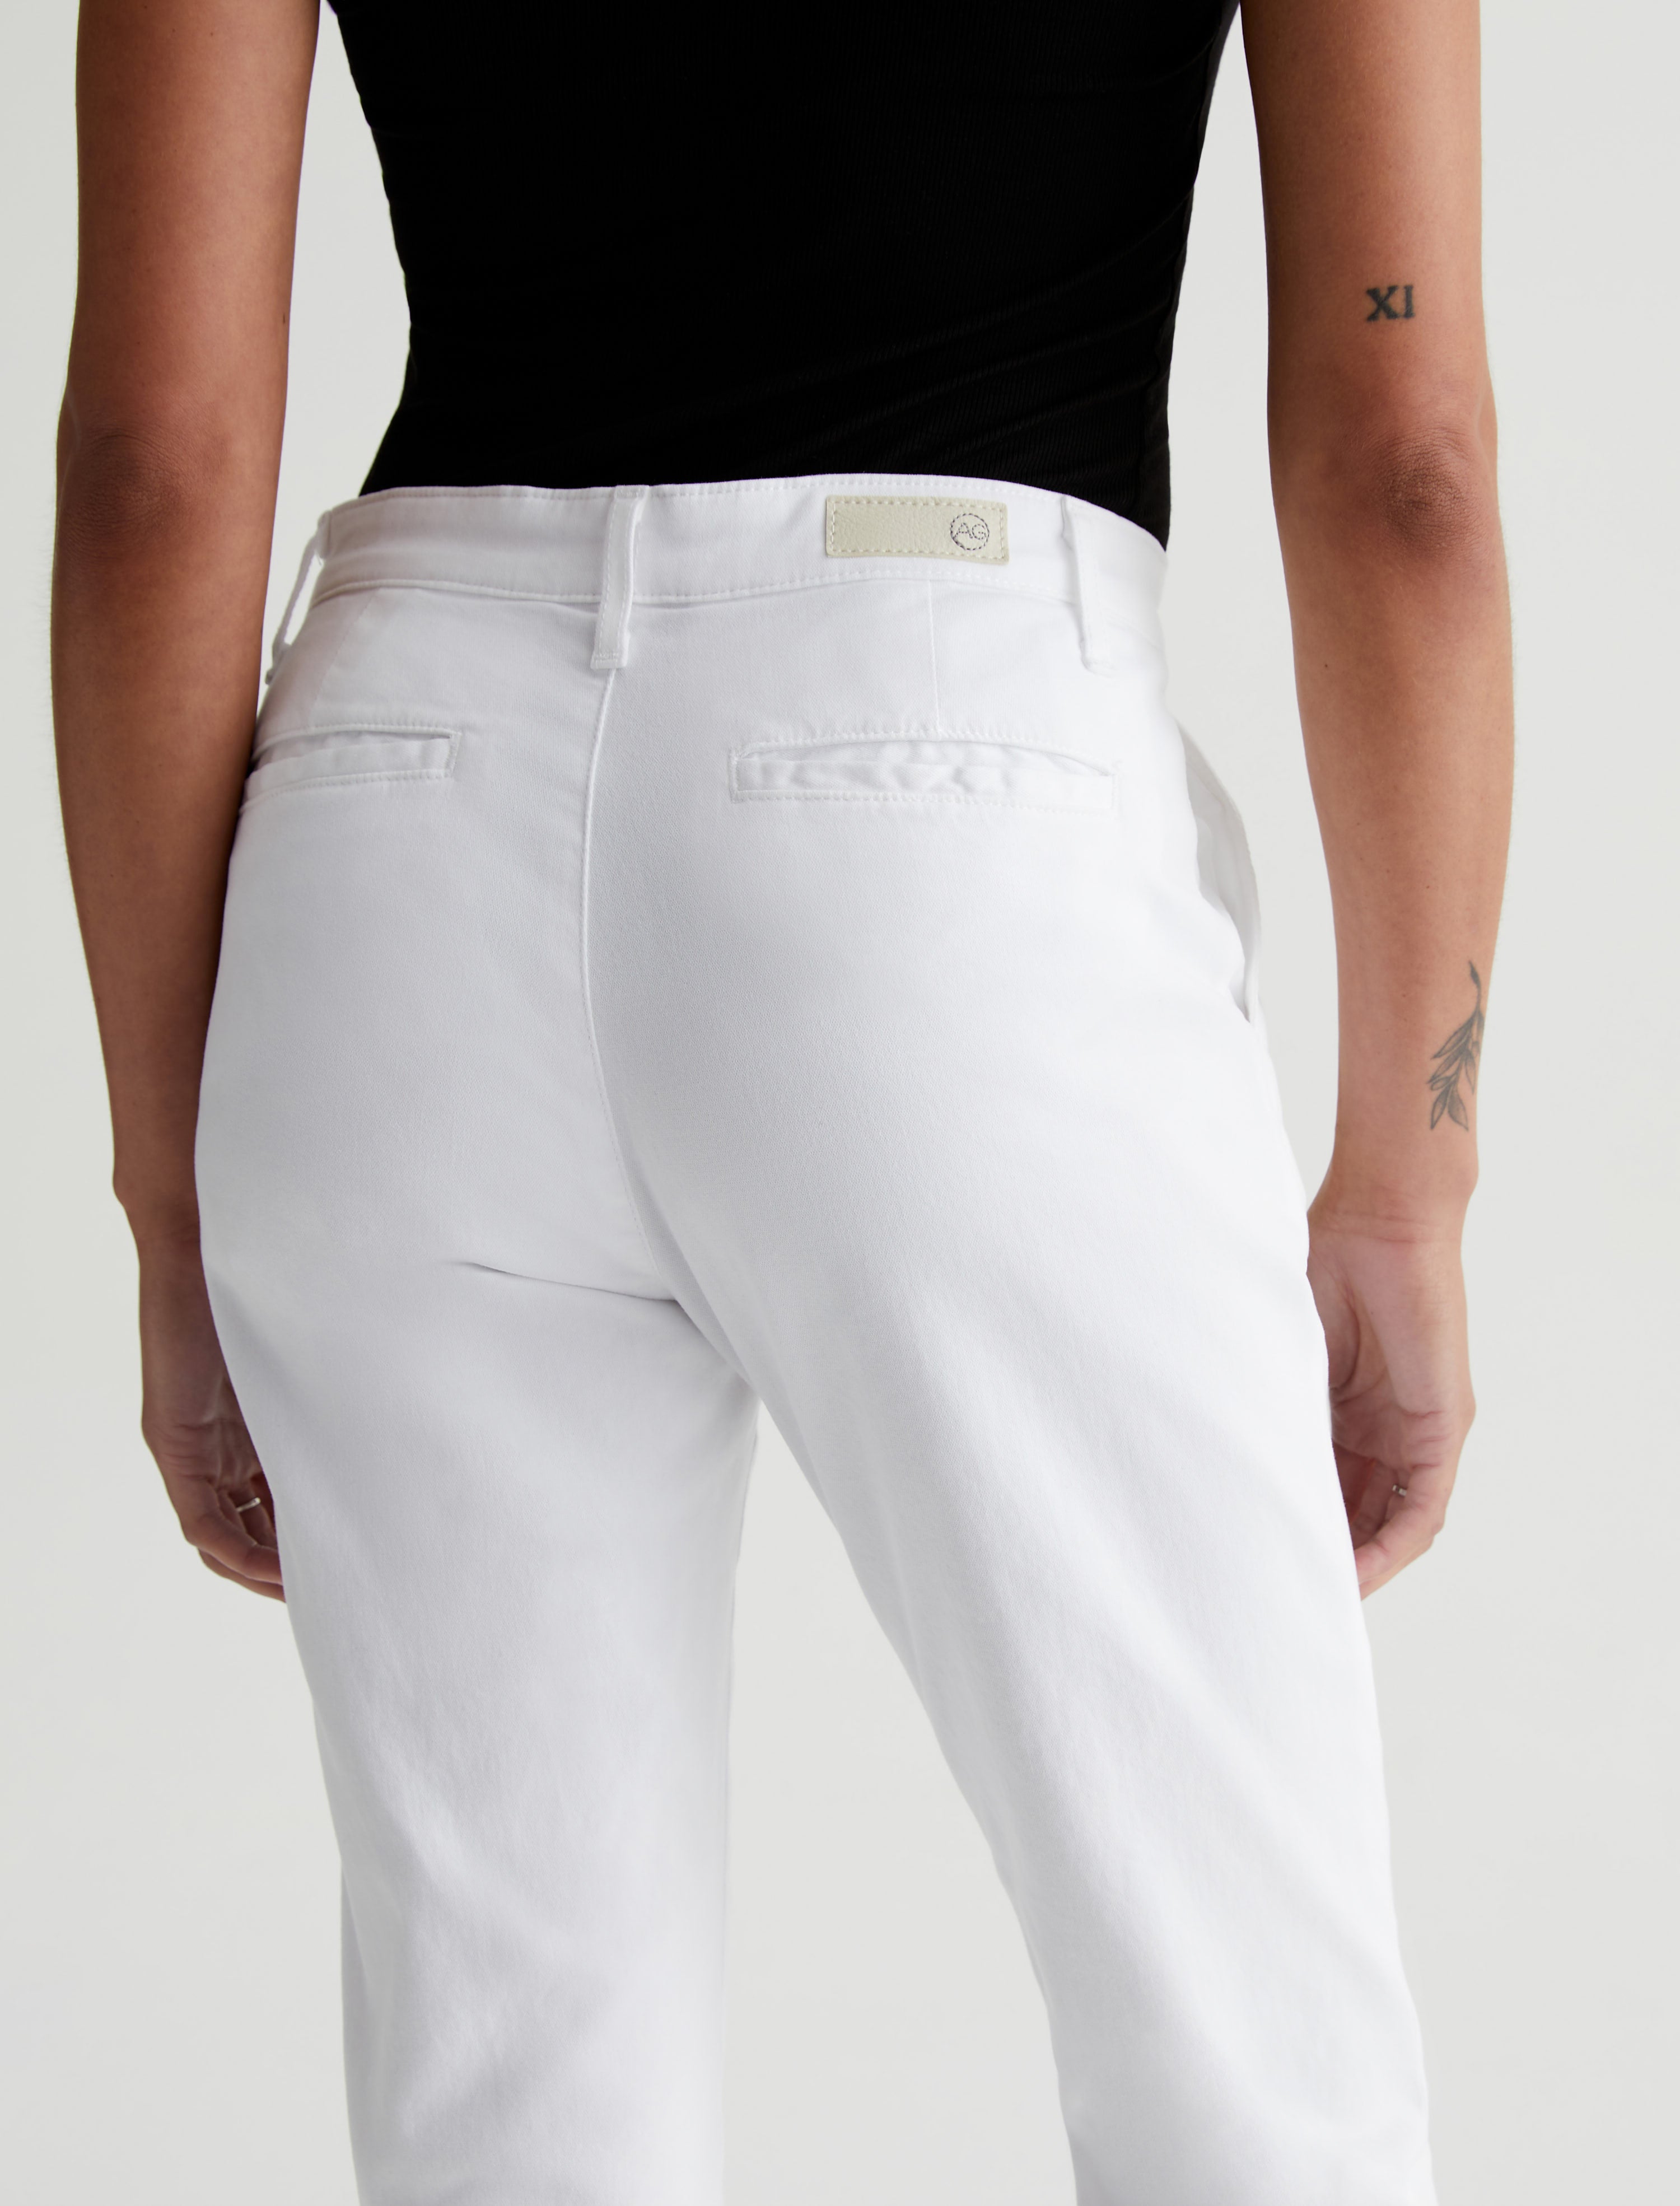 6 pairs of chic white pants for summer that shoppers say aren't see-through  at all